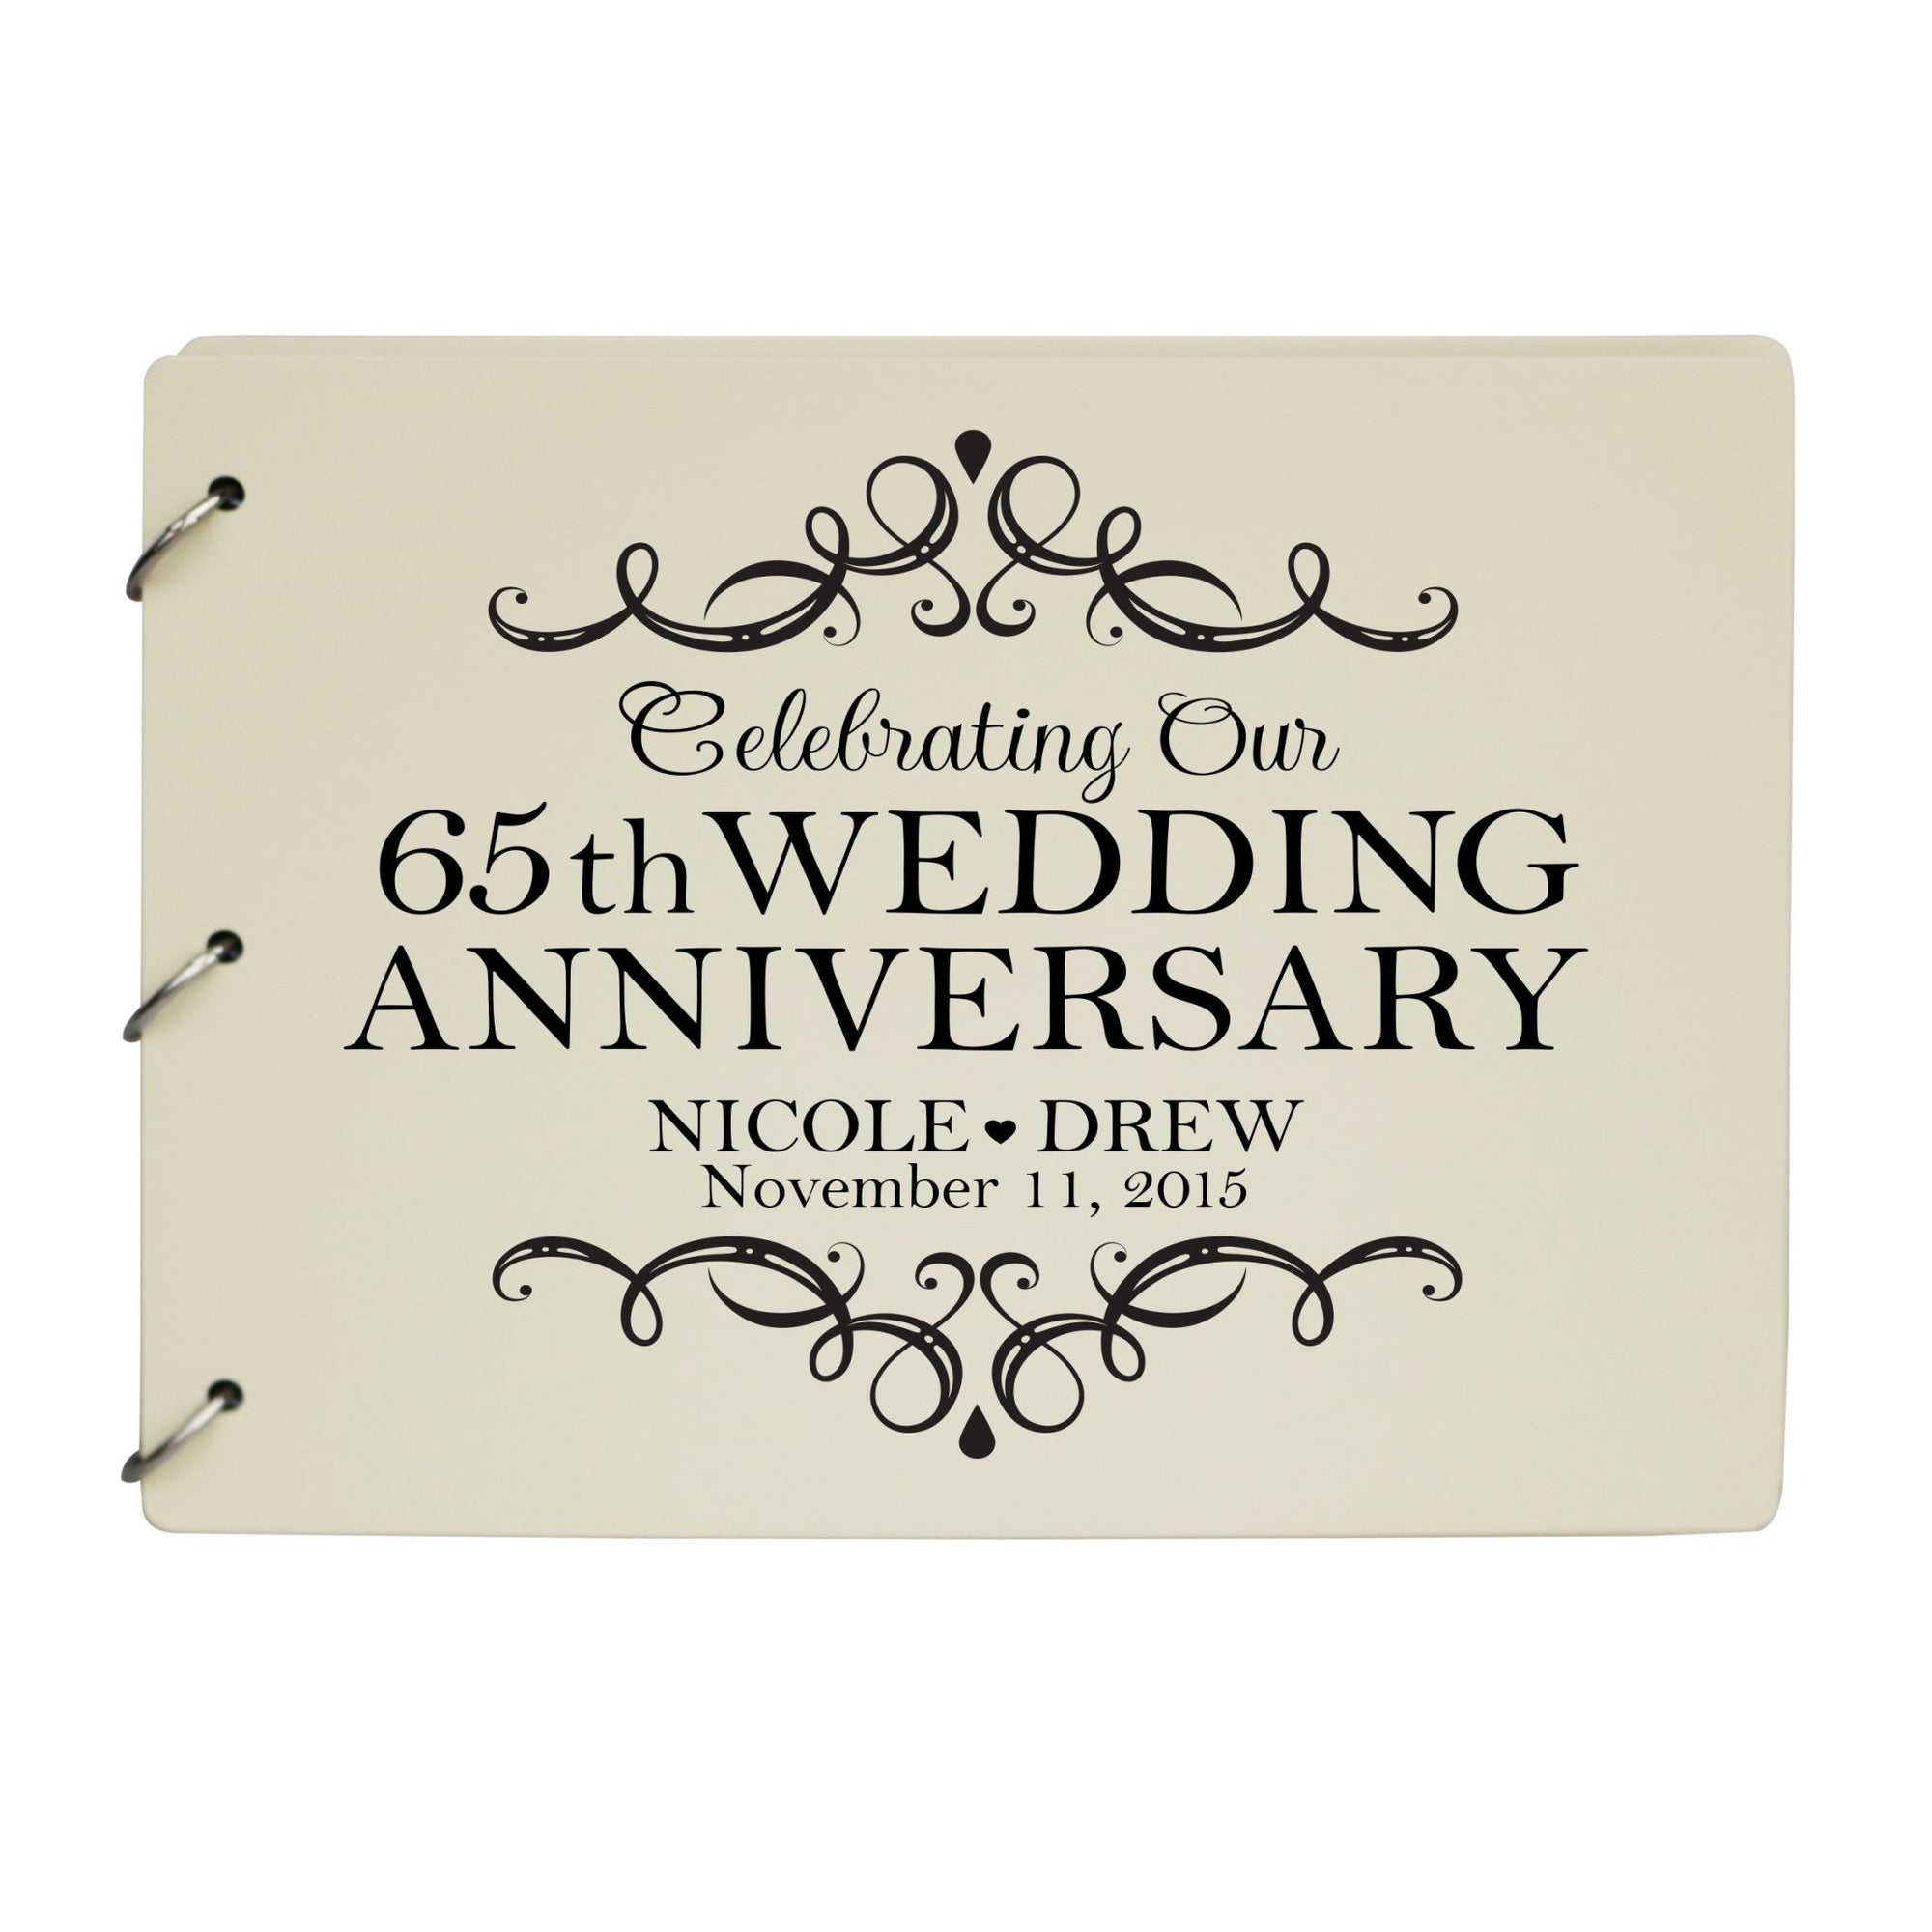 Personalized 65th Wedding Anniversary Guestbook - LifeSong Milestones